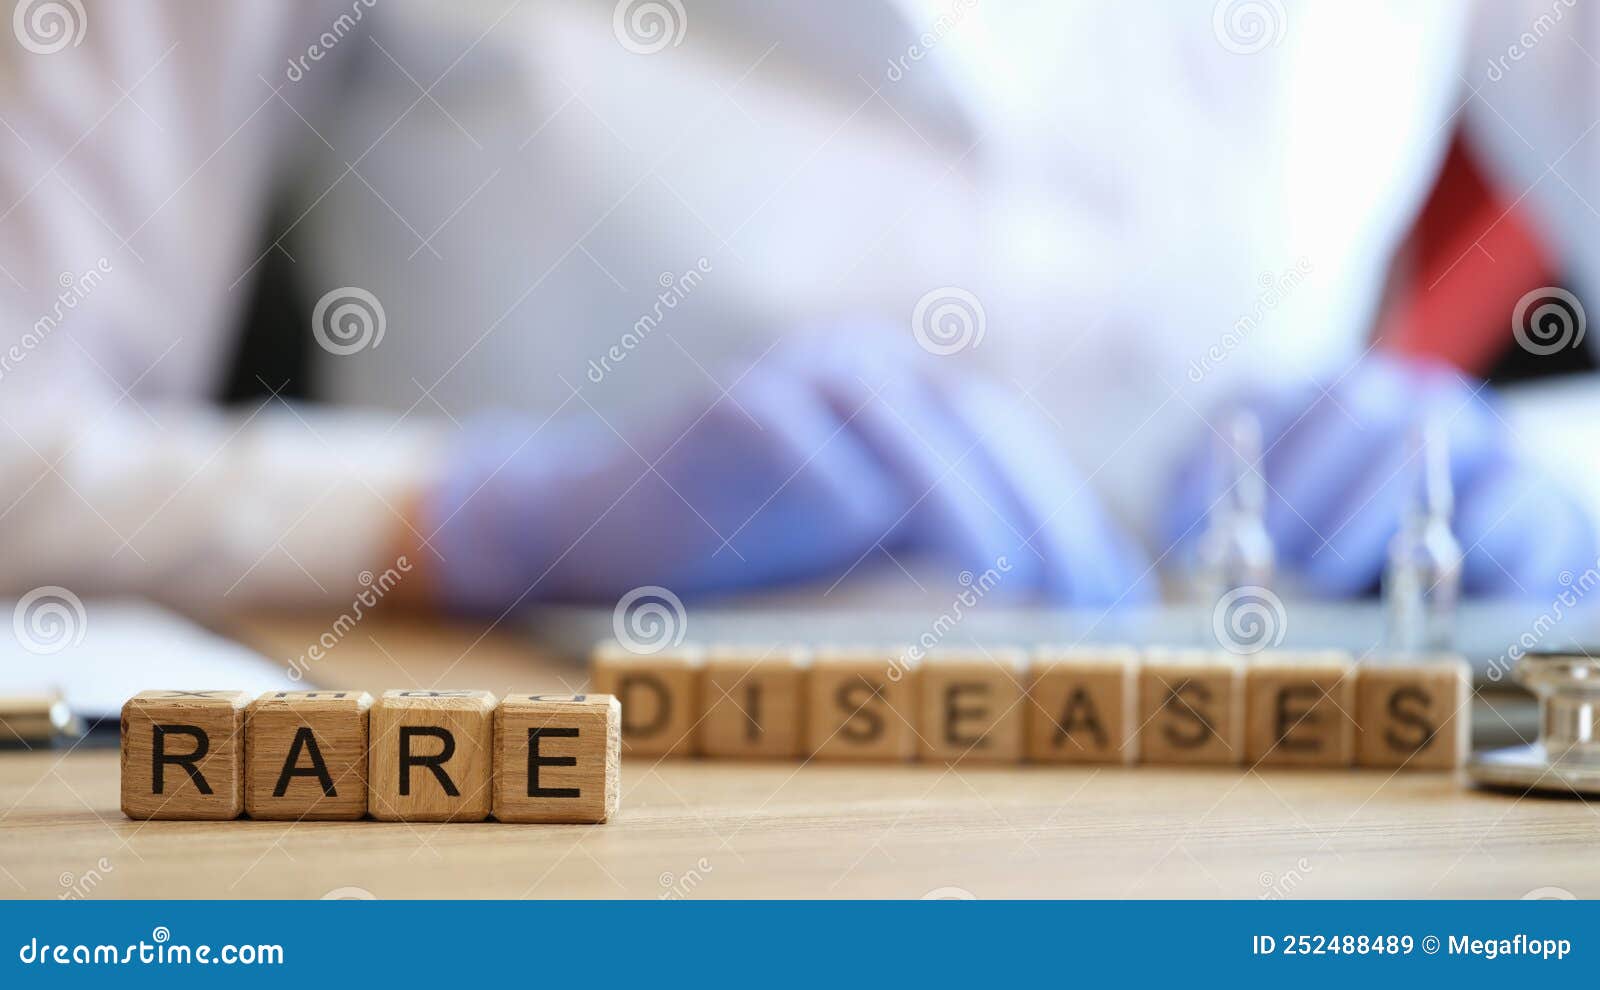 rare disease words collected with wooden cubes